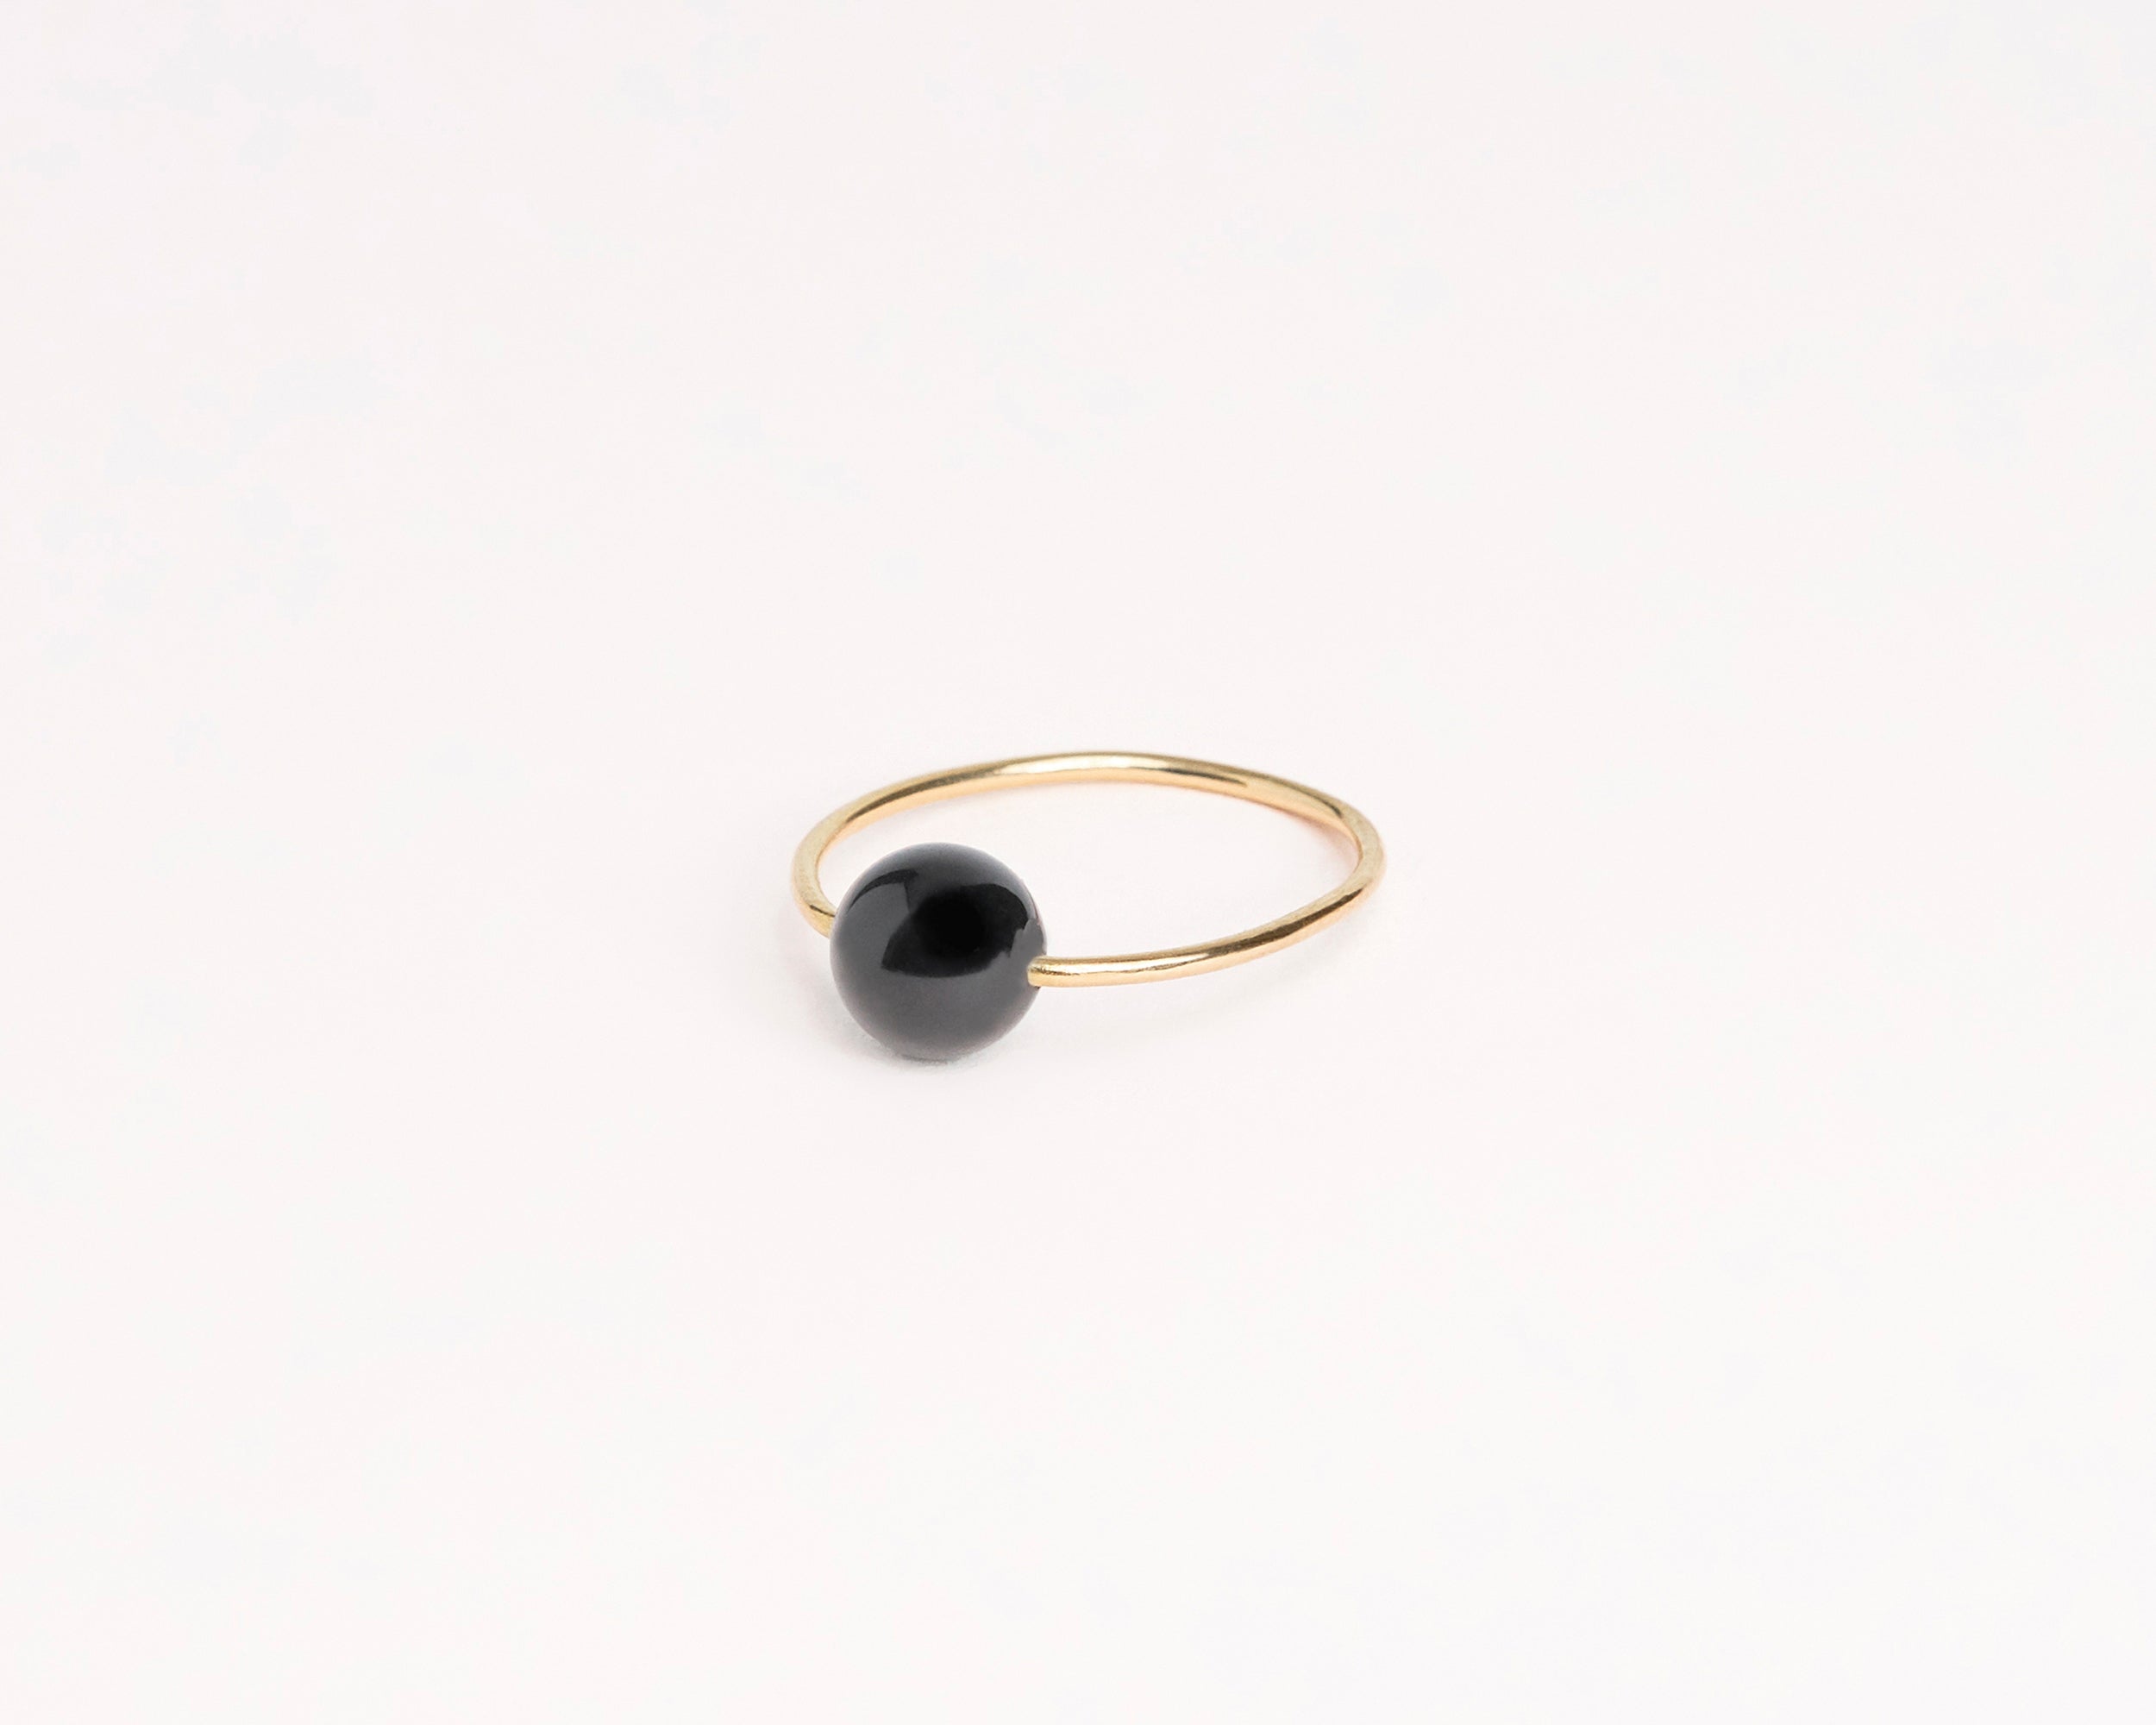 18KT yellow gold ring with onyx stone - Ovale Onice